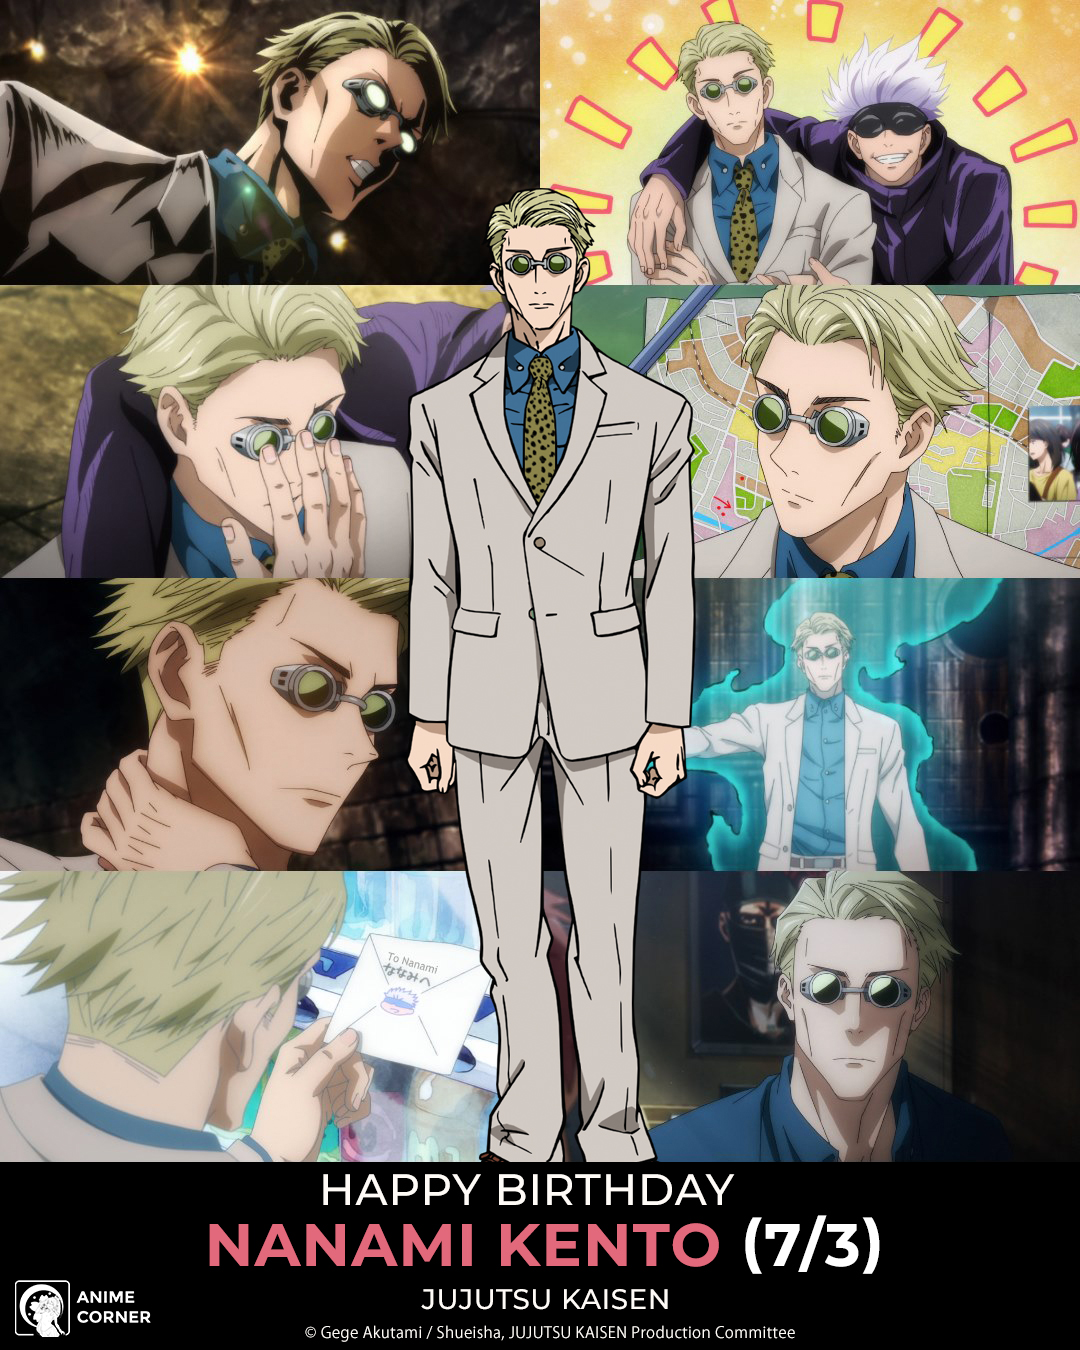 Anime Corner - Happy Birthday to one of the most badass characters